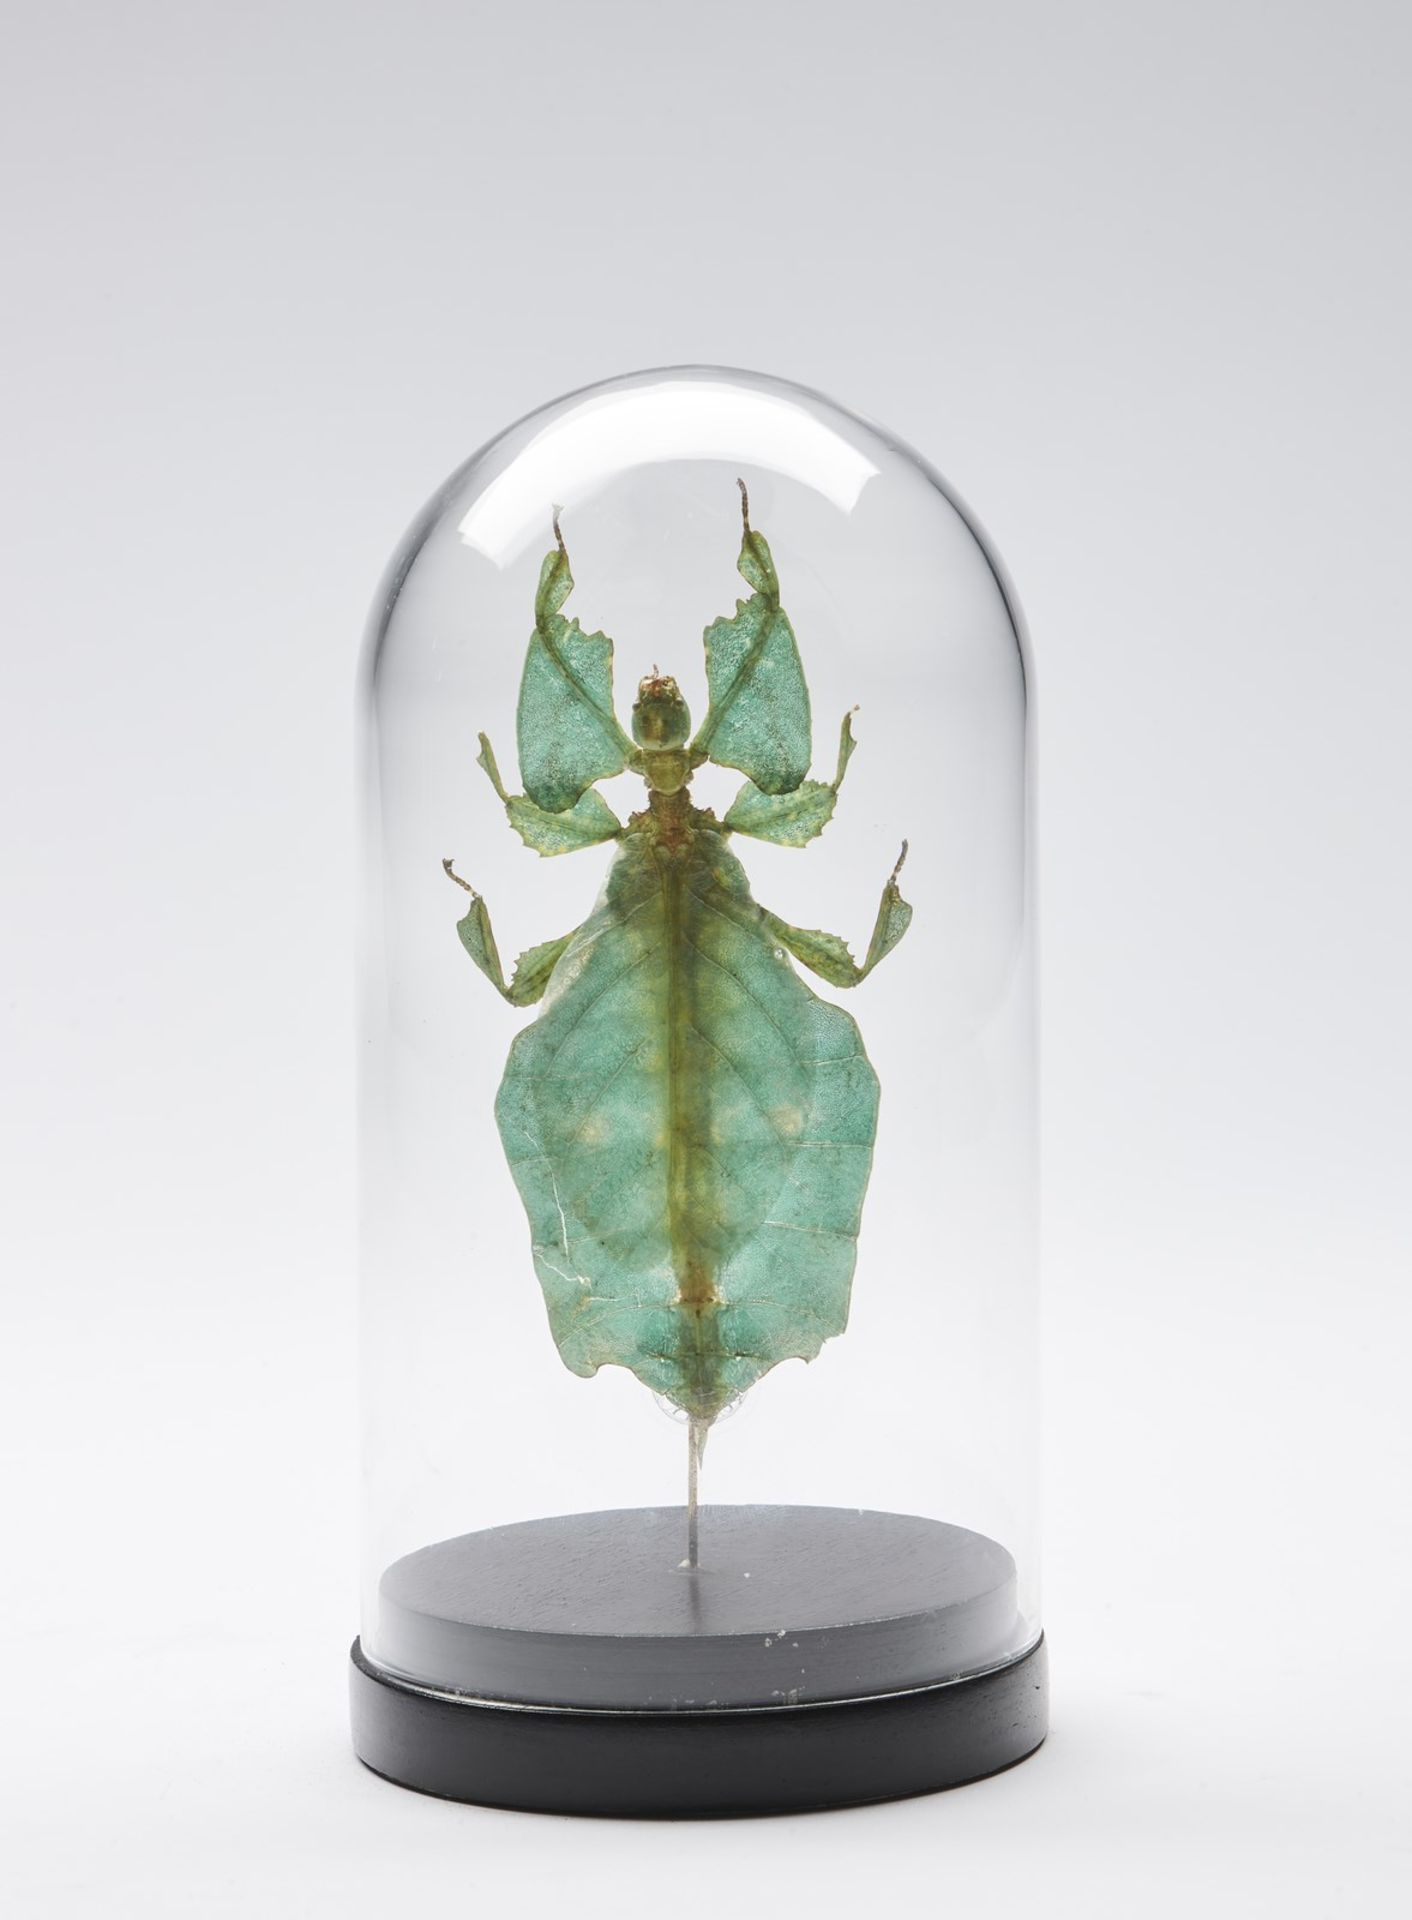 Naturalia Giant leaf insect under glass bell.